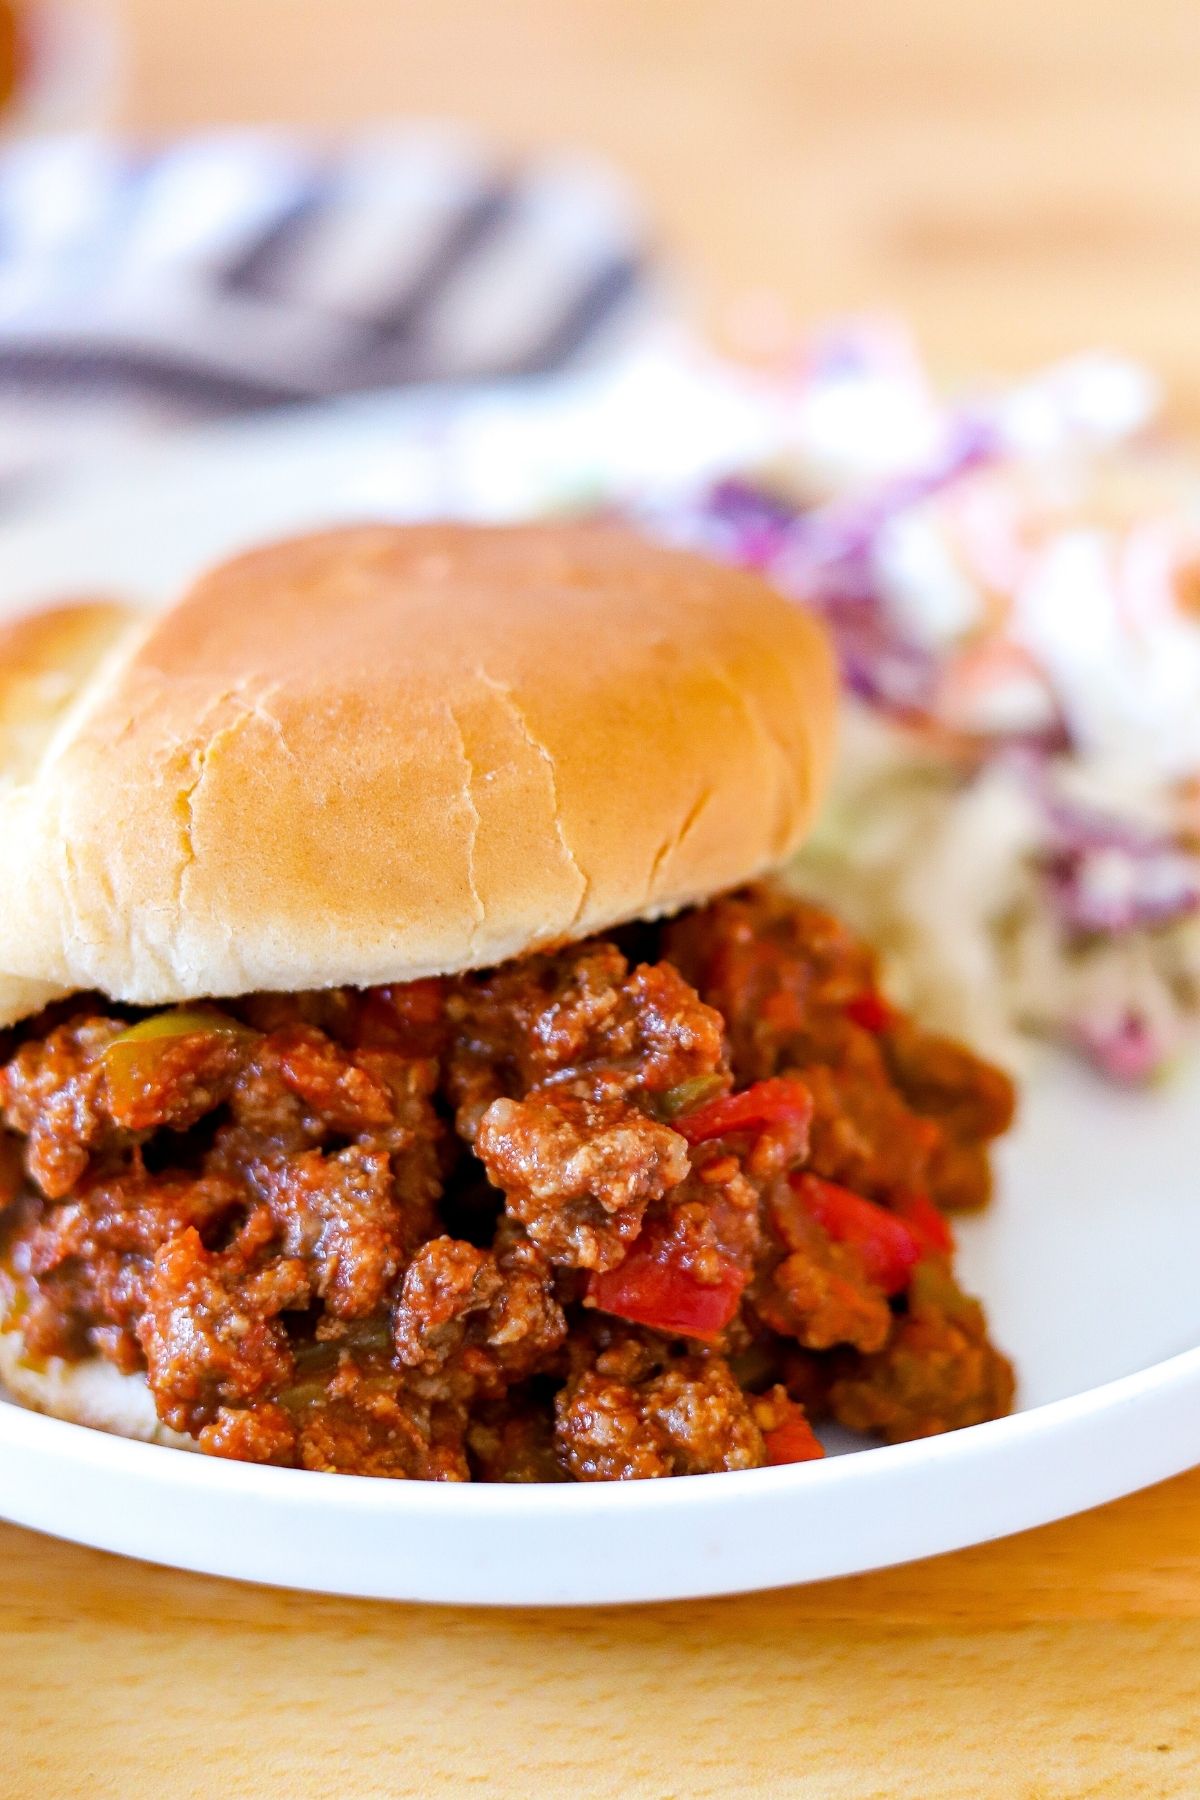 A sloppy joe with red and green peppers on a white plate